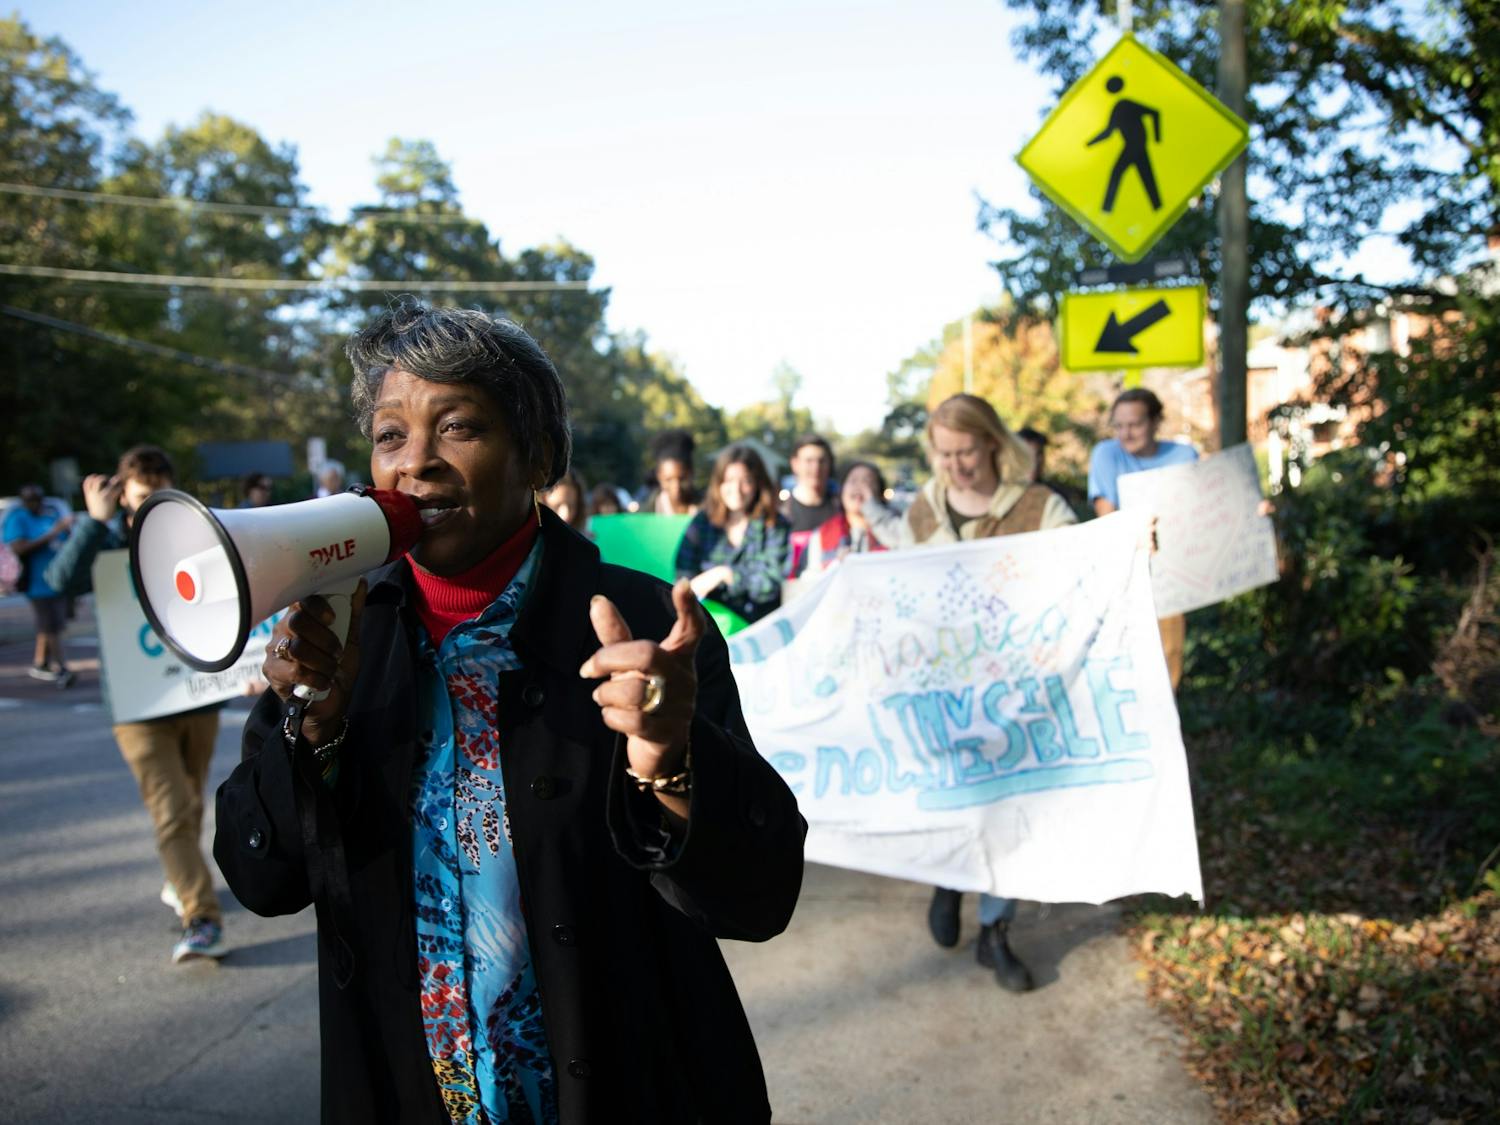 Protestors gathered in downtown Chapel Hill Friday to push the candidates of local elections to support more effective affordable housing policies.